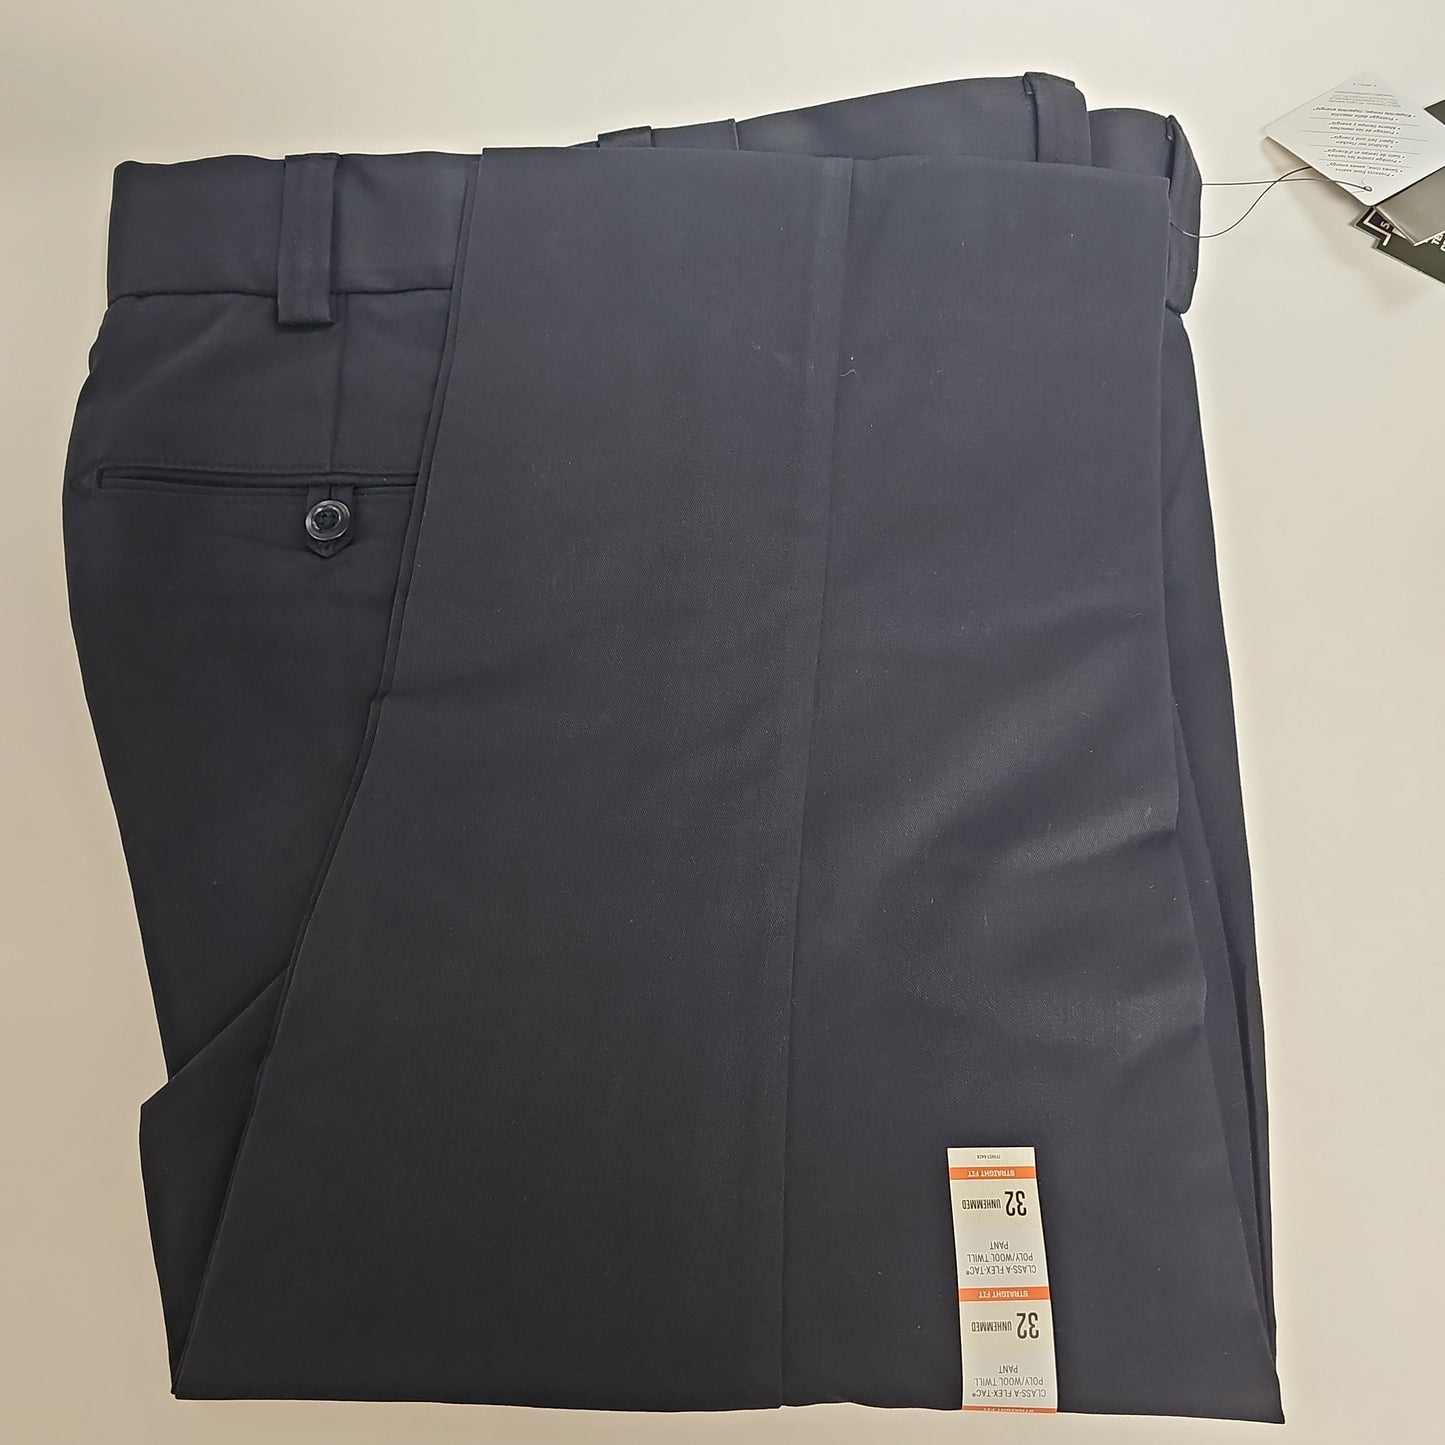 5.11 Tactical Pant Twill, FT PolyWool Class-A Midnight Navy, 32 74492-750-32